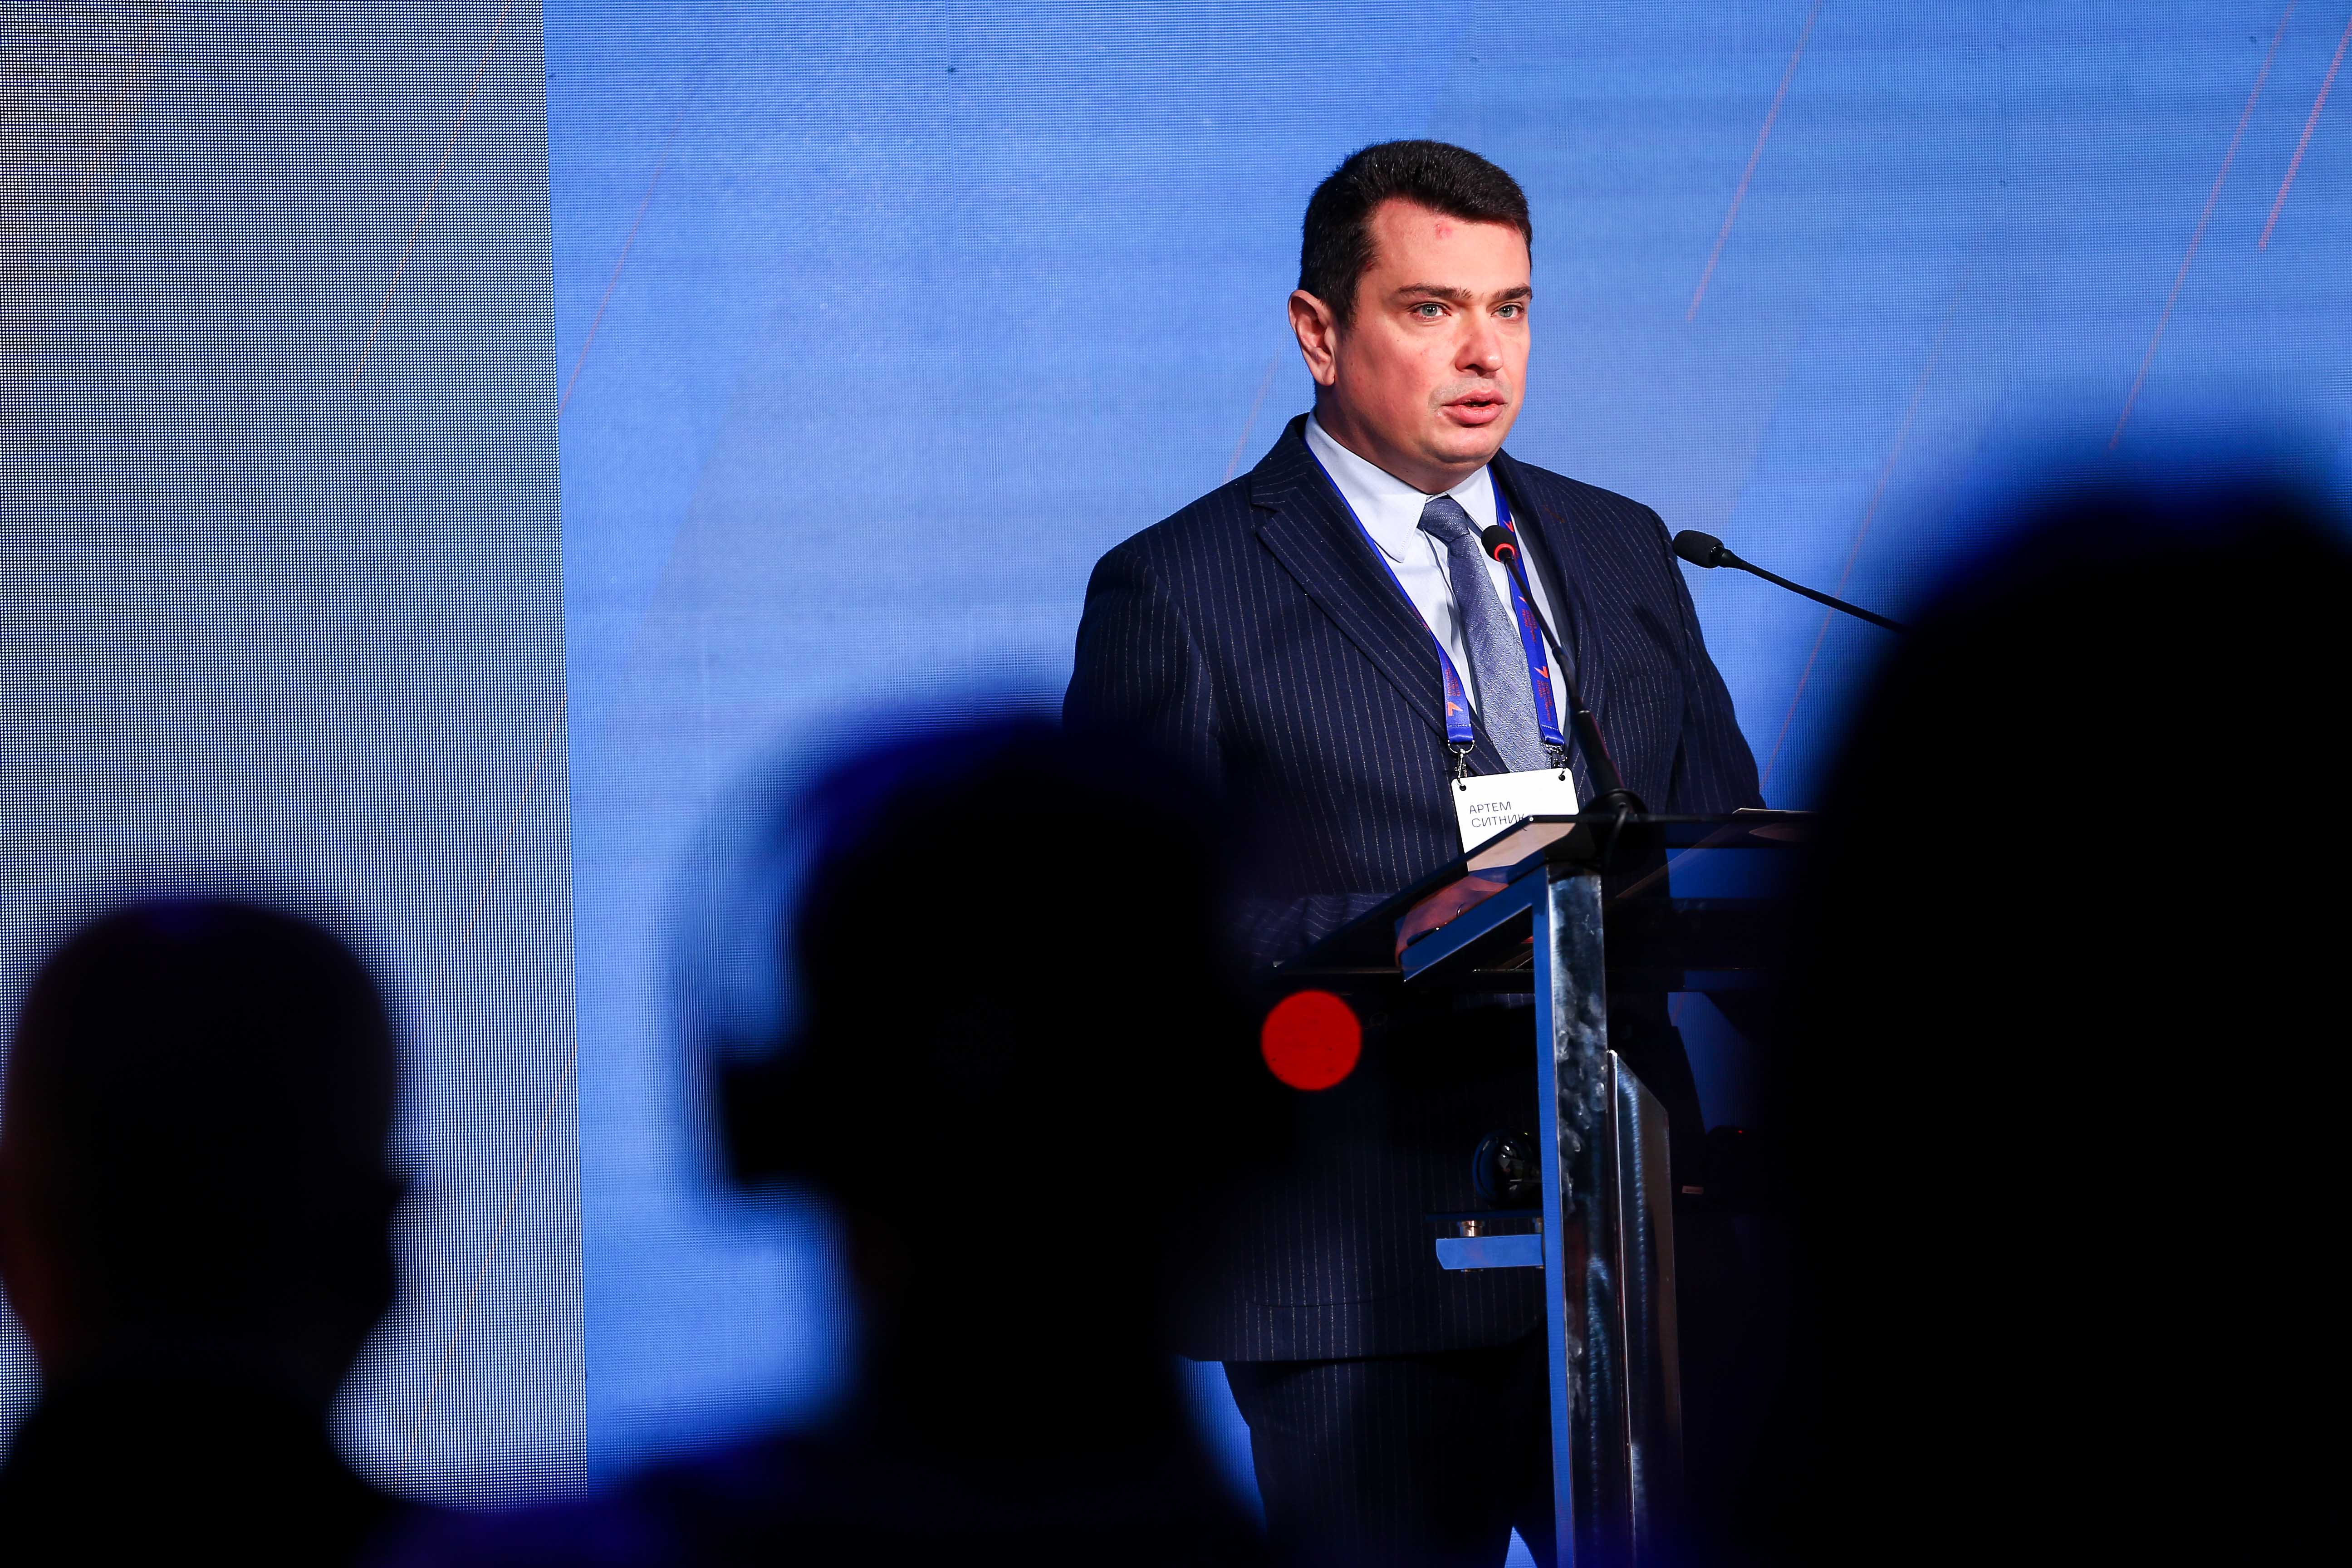 Seven years of fruitful and productive work of the NABU under Artem Sytnyk's leadership